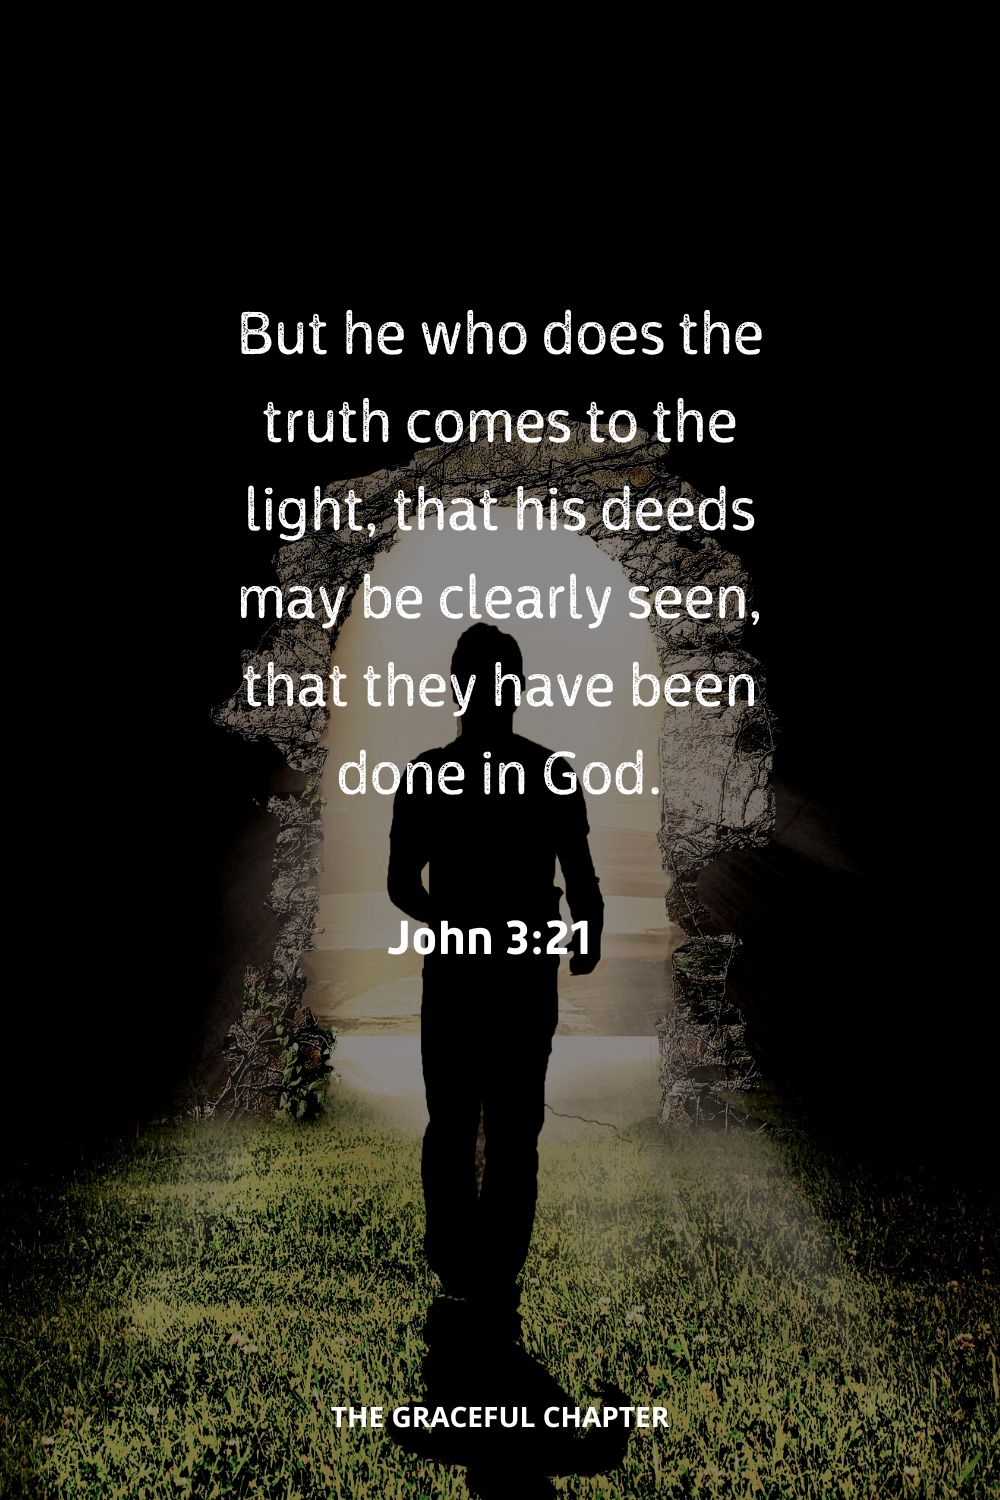 But he who does the truth comes to the light, that his deeds may be clearly seen, that they have been done in God.”